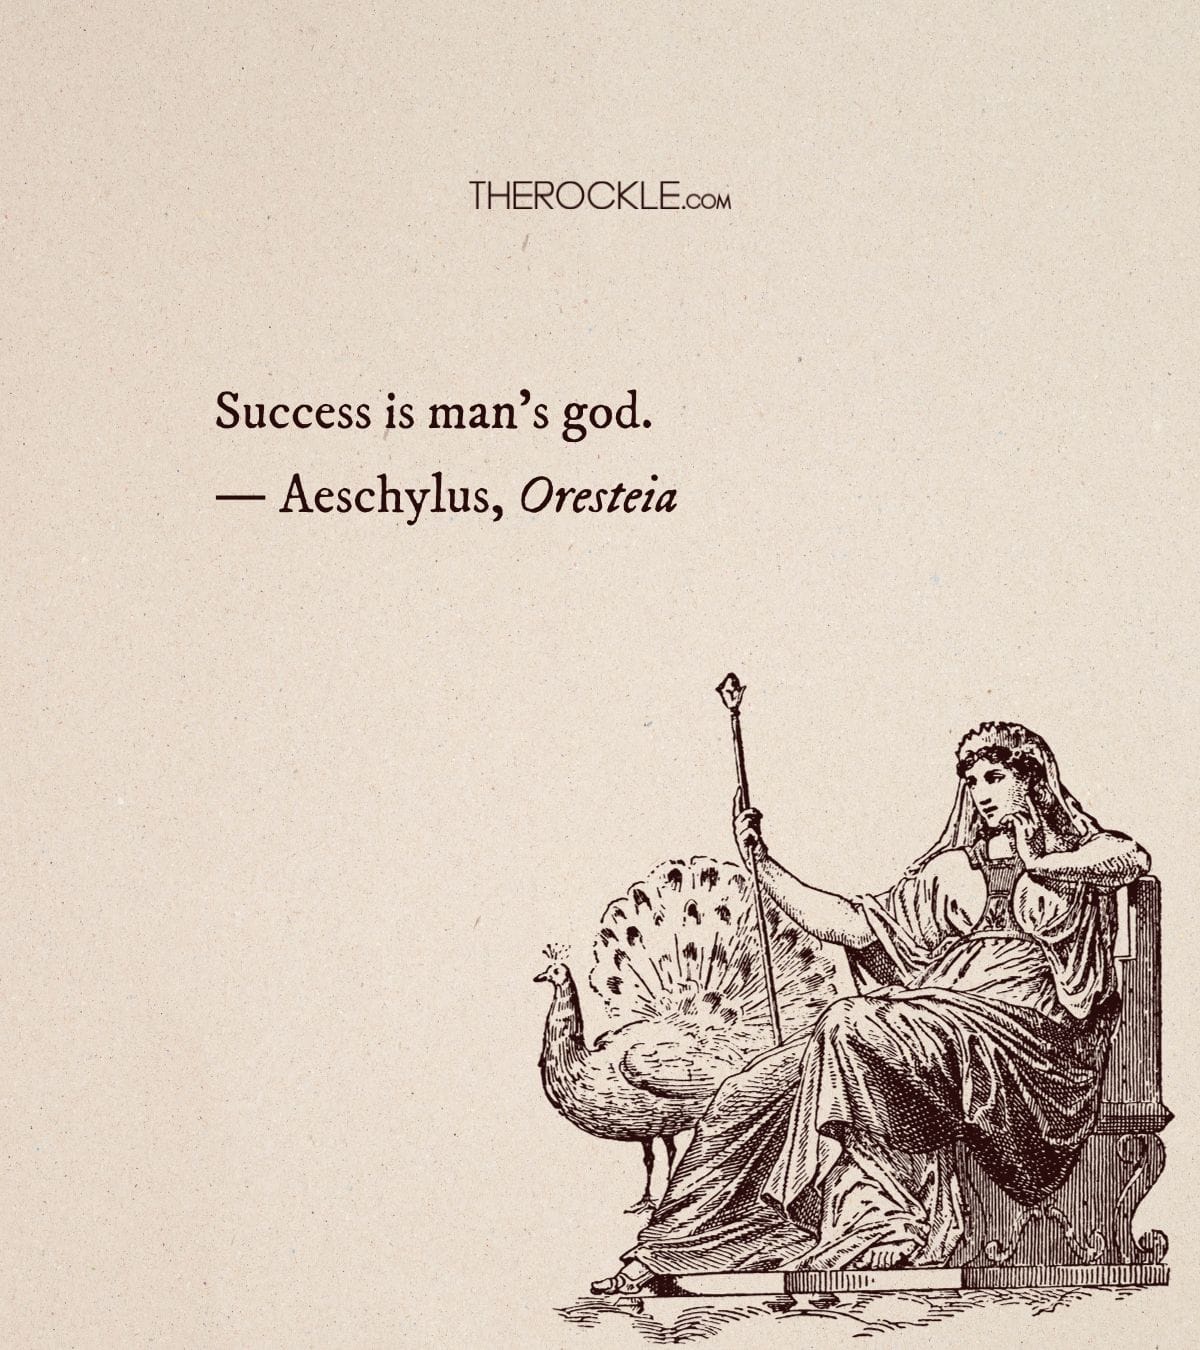 Aeschylus' quote from Oresteia on how people worship success